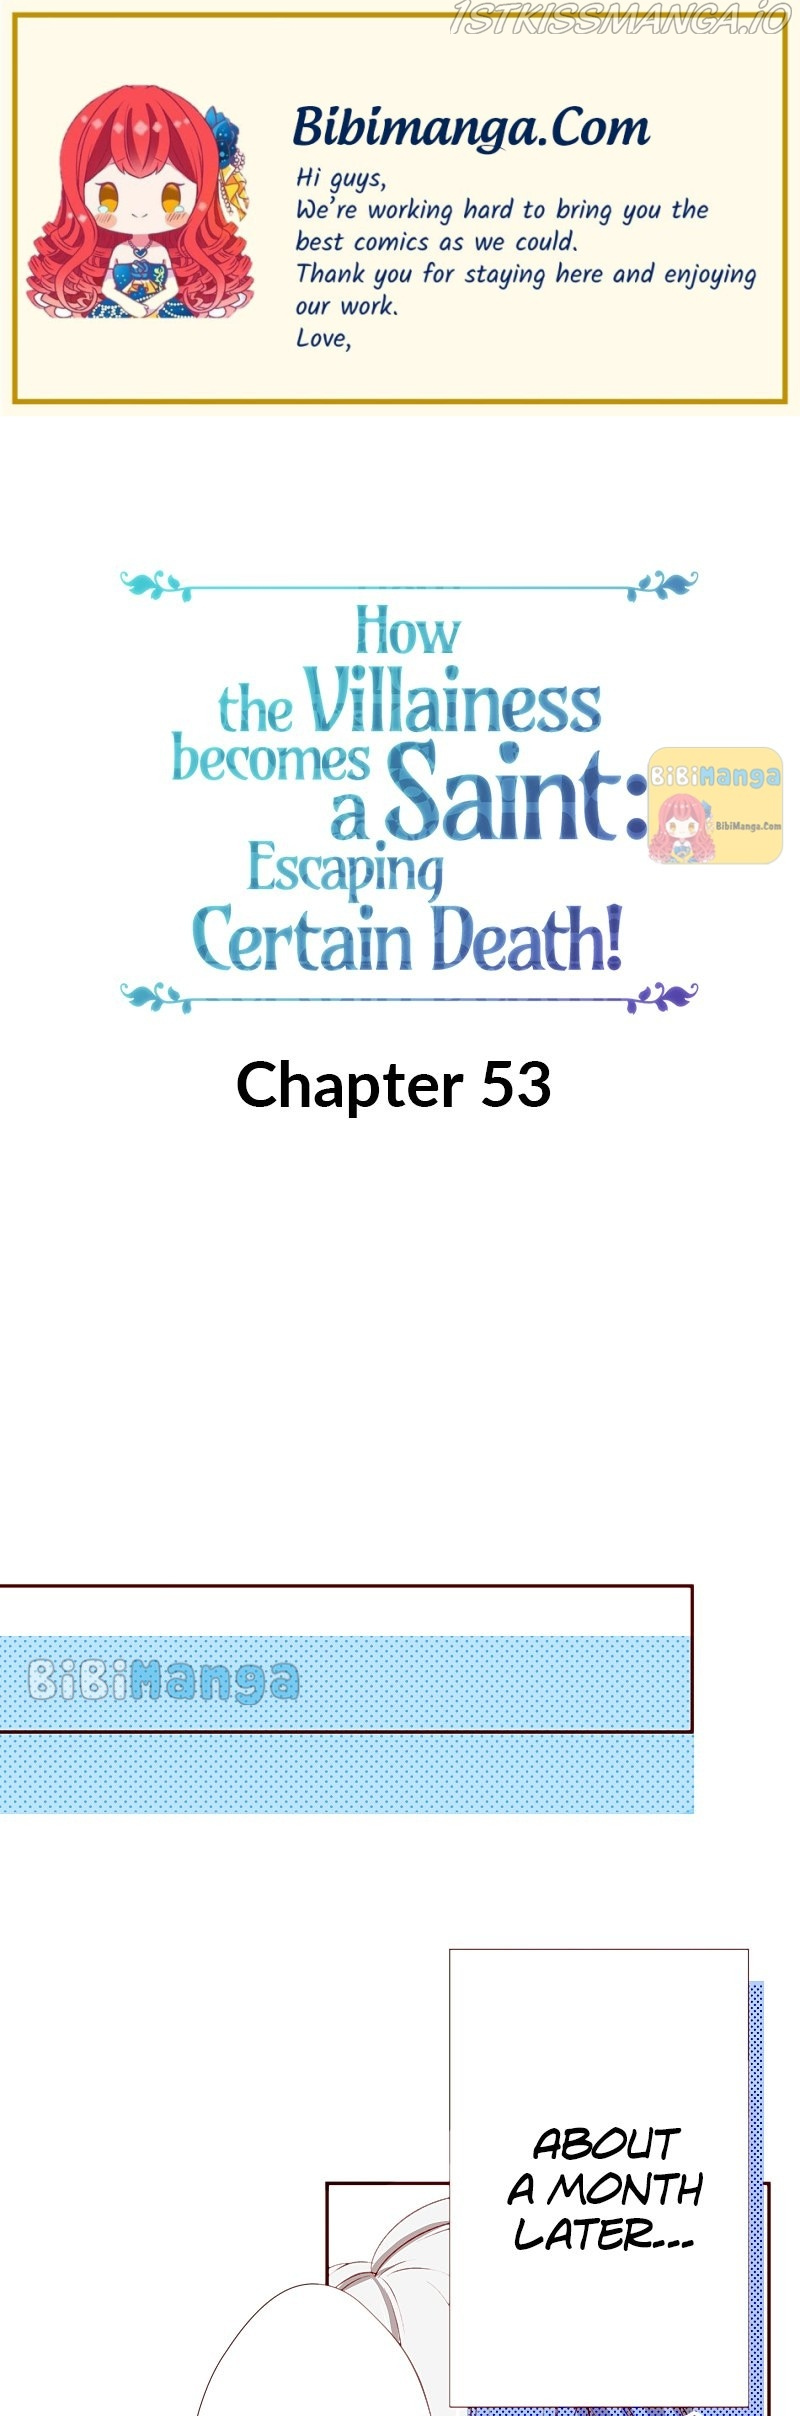 How The Villainess Becomes A Saint: Escaping Certain Death! - Page 1